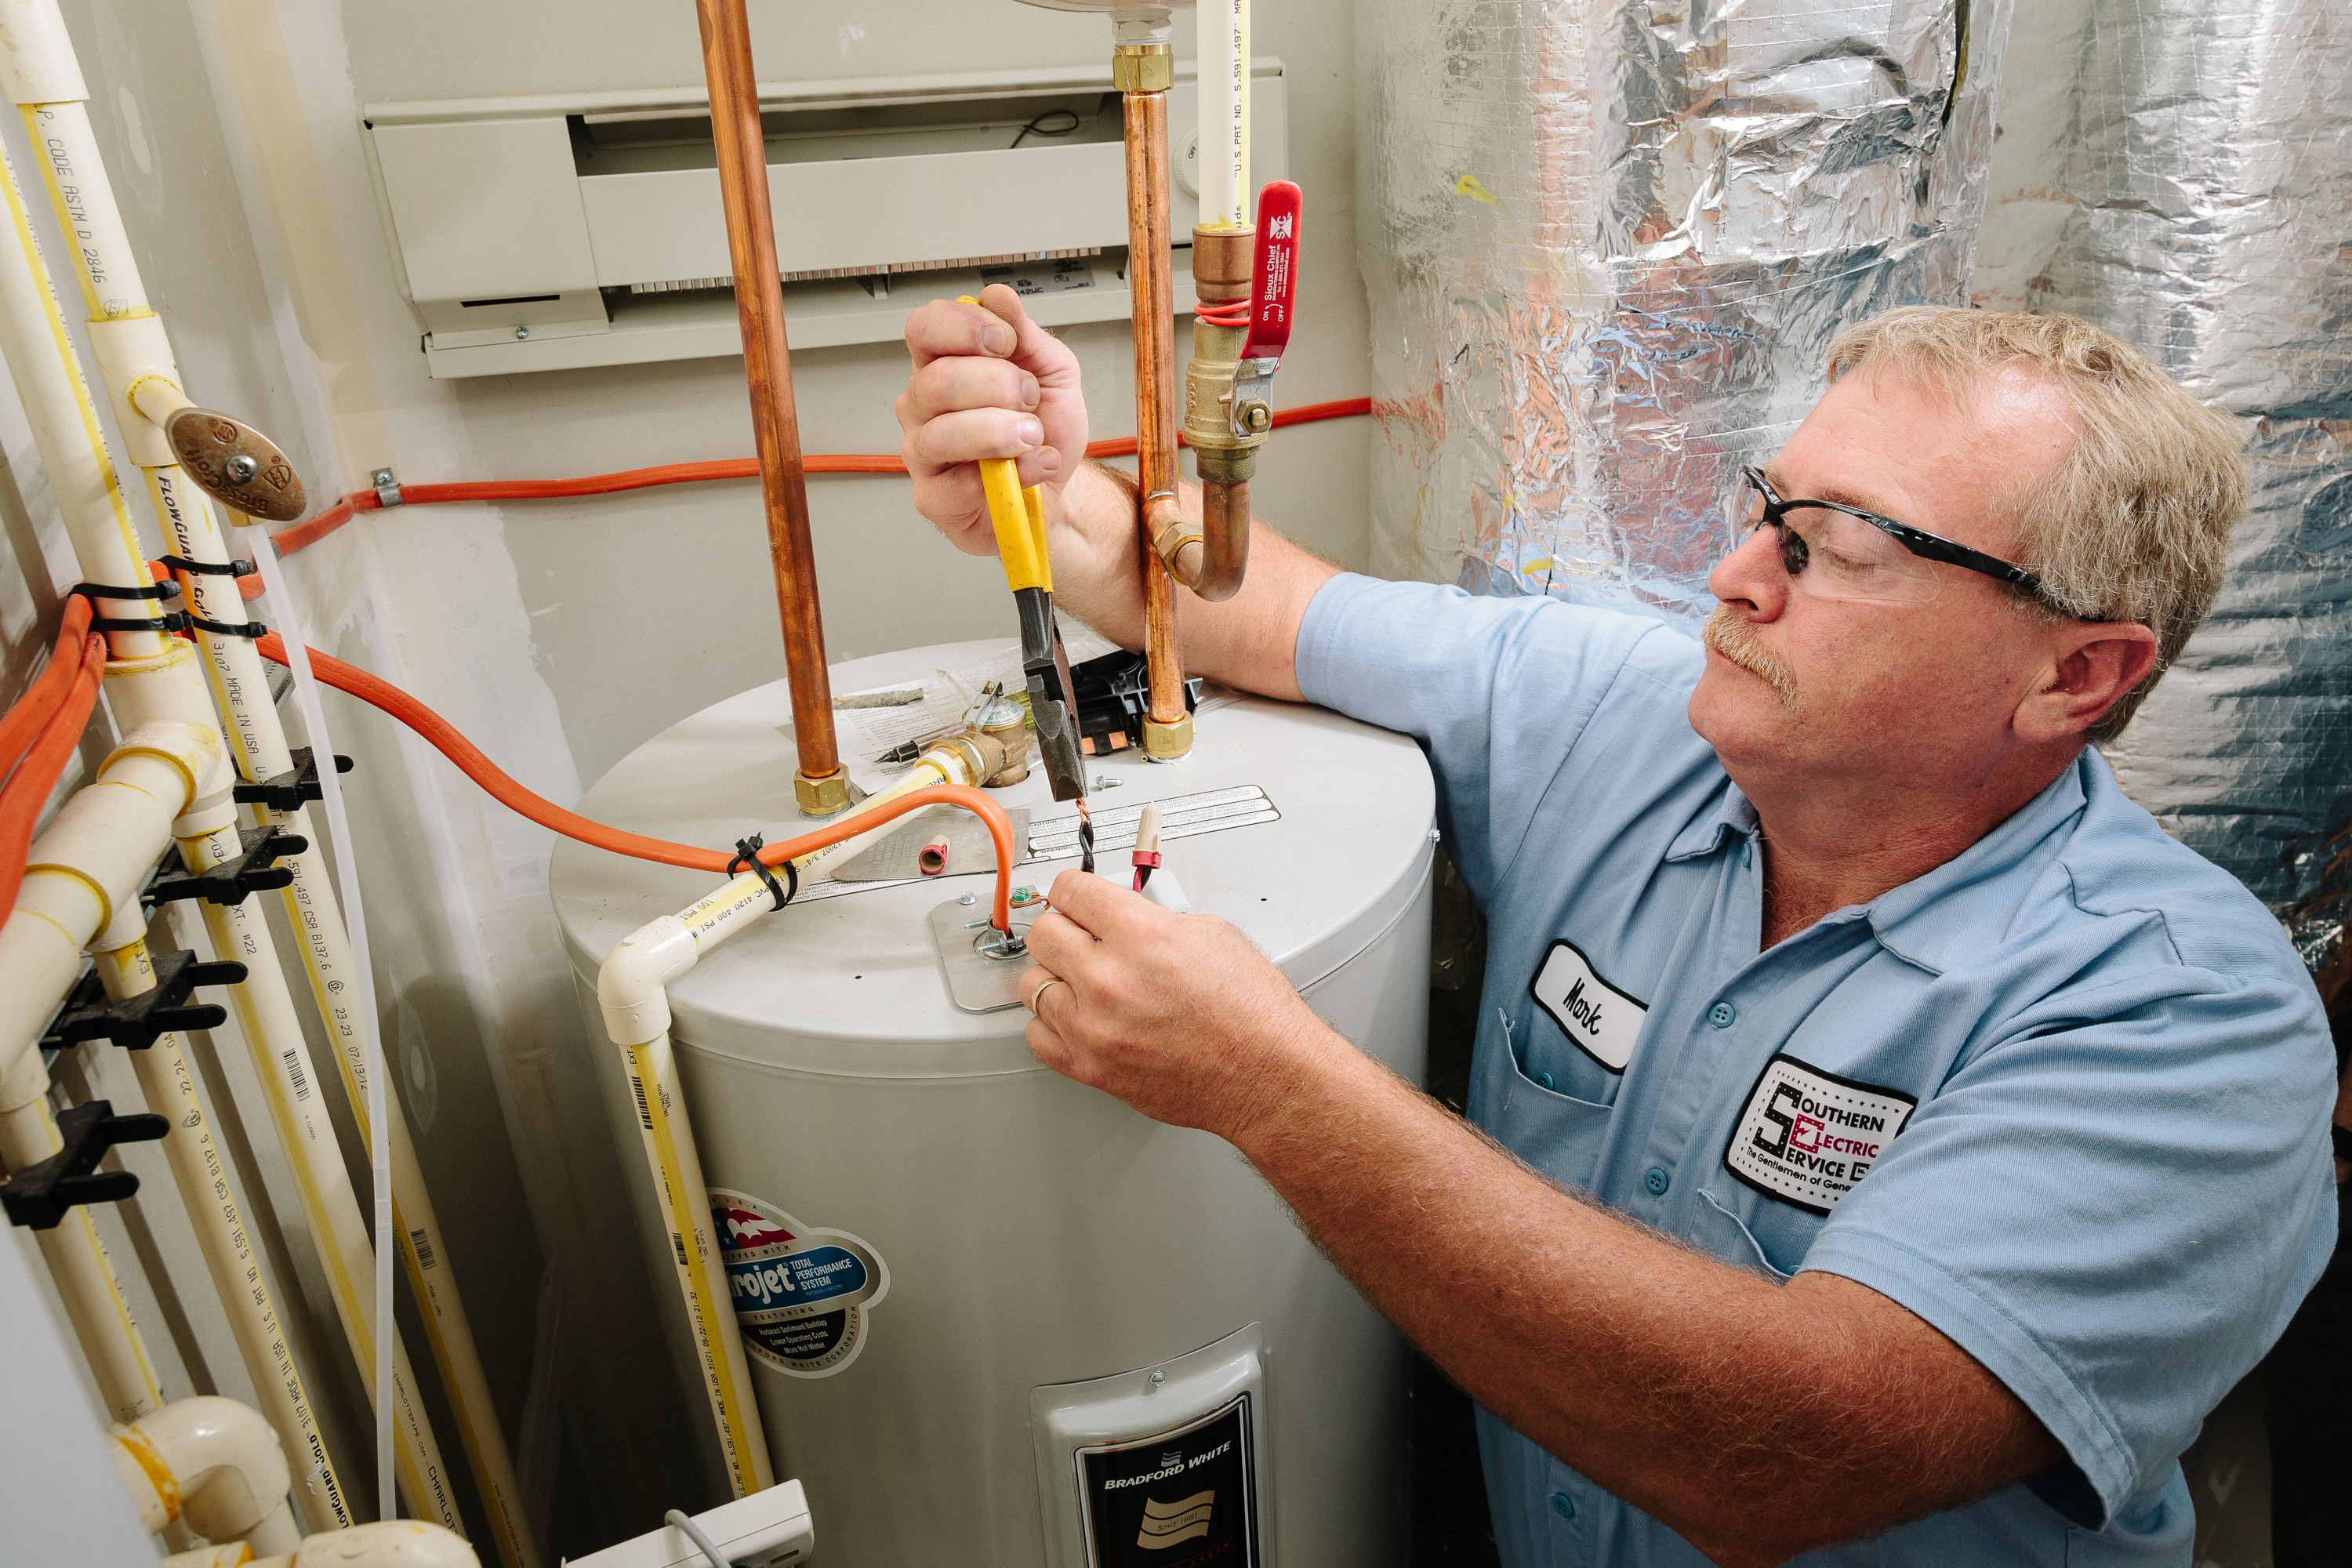 Electrician for Hot Water Heater Installation - Leesburg based Electricians  of SESCOS